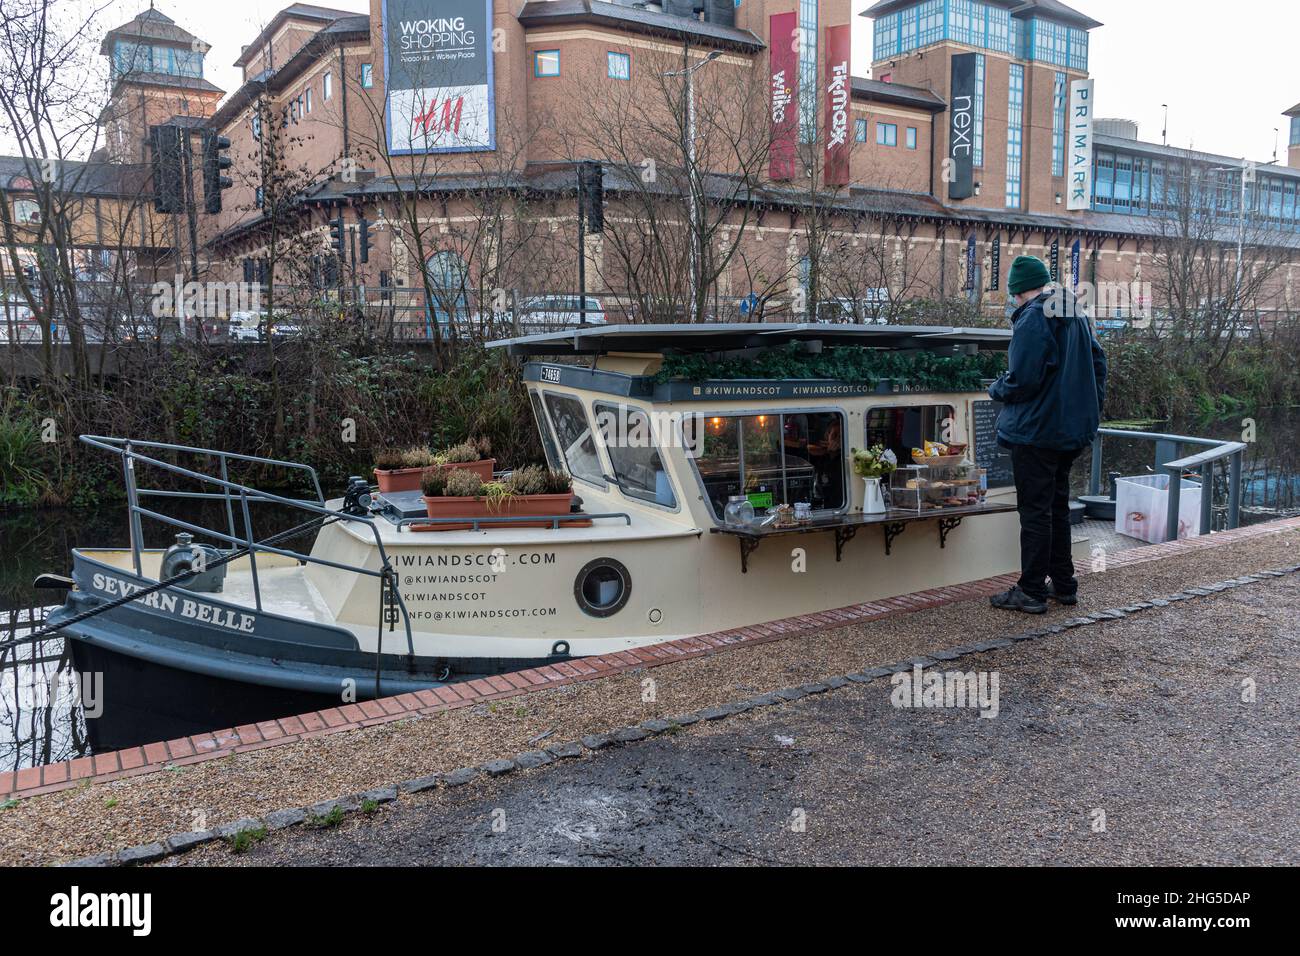 Kiwi and Scot cafe on a boat, Basingstoke Canal at Woking town, Surrey, England, UK, serving coffee and cakes during winter Stock Photo